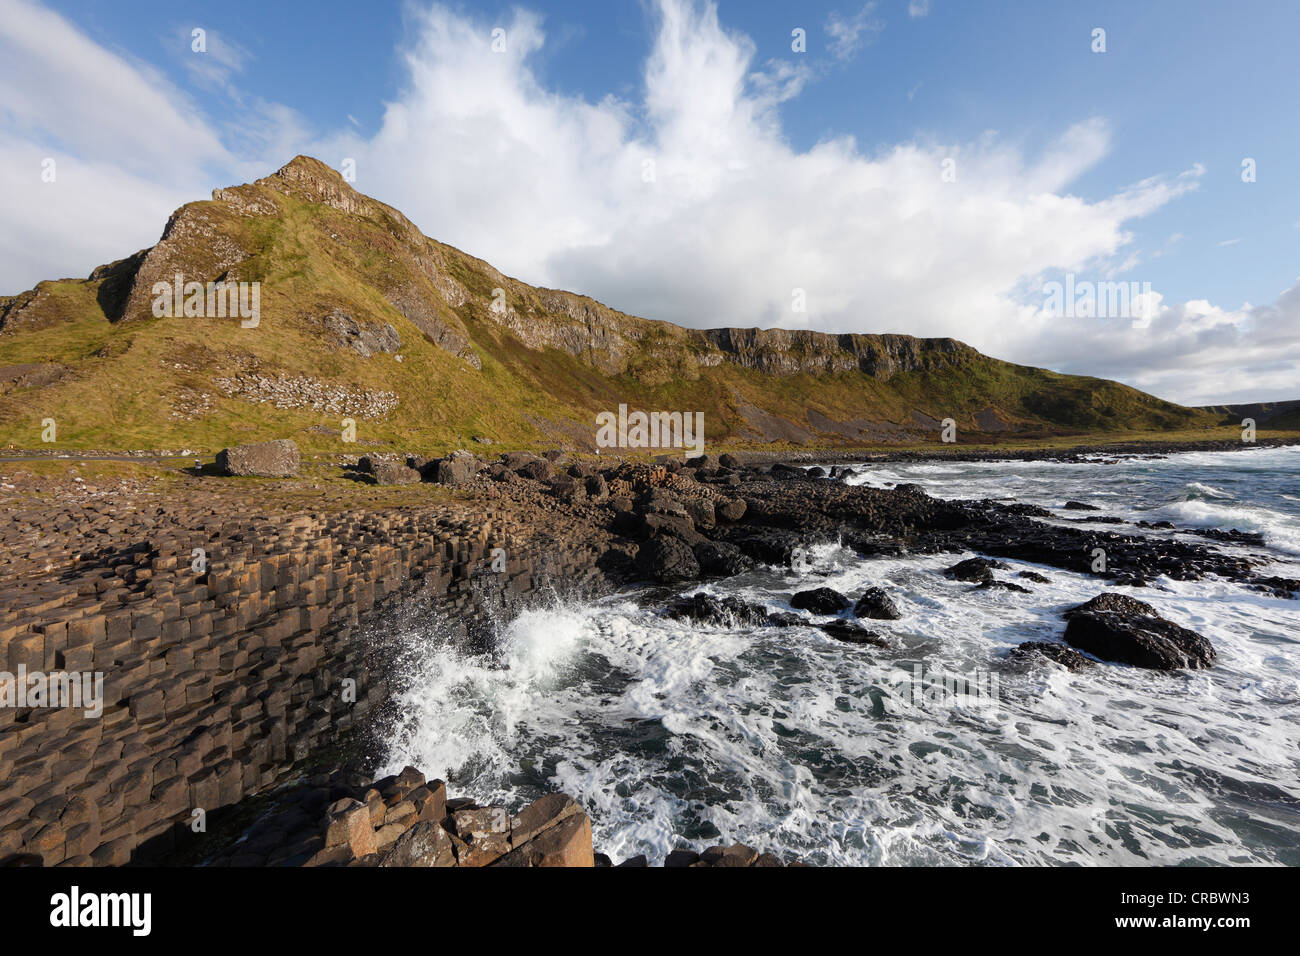 Giant's Causeway with Aird's Snout mountain, Causeway Coast, County Antrim, Northern Ireland, United Kingdom, Europe Stock Photo